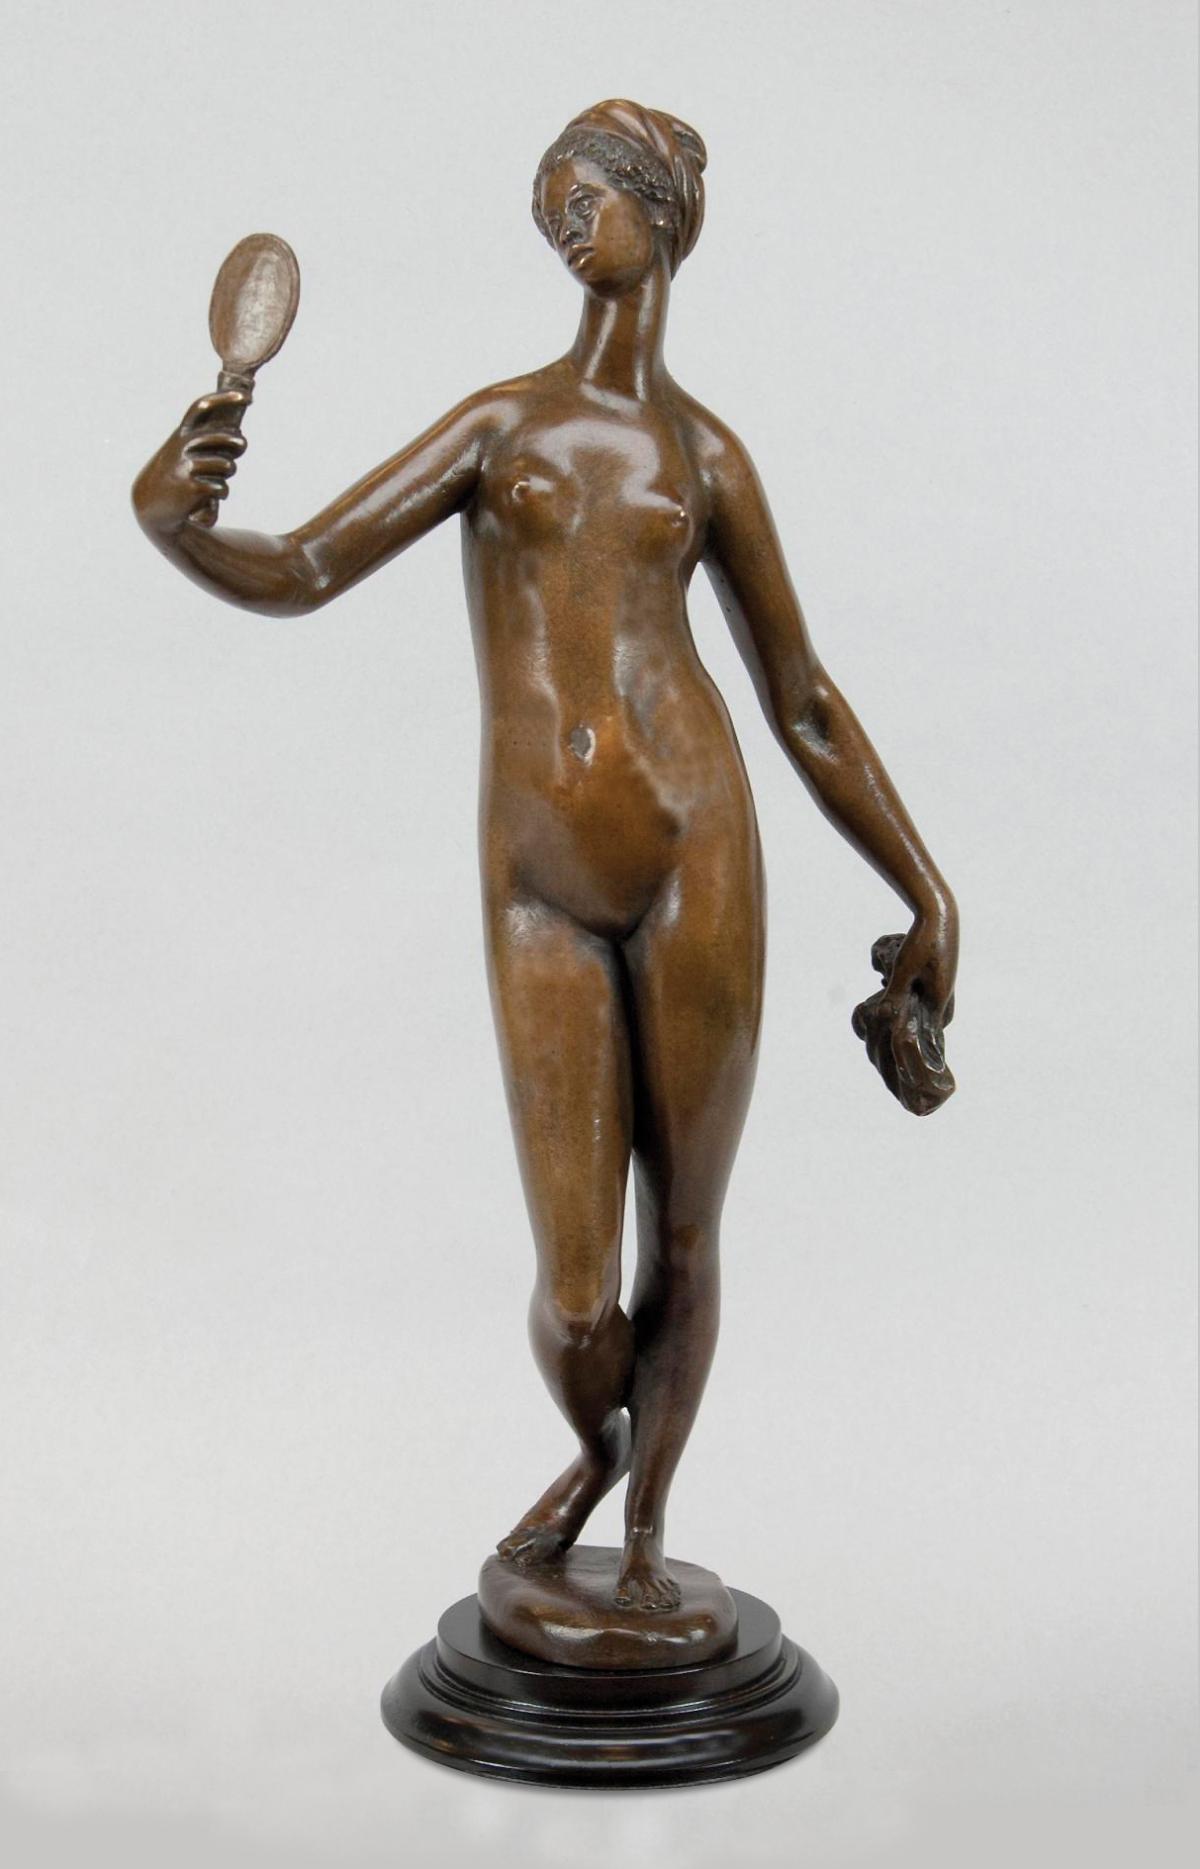 Bronze colored sculpture of a woman looking at herself in a hand-held mirror